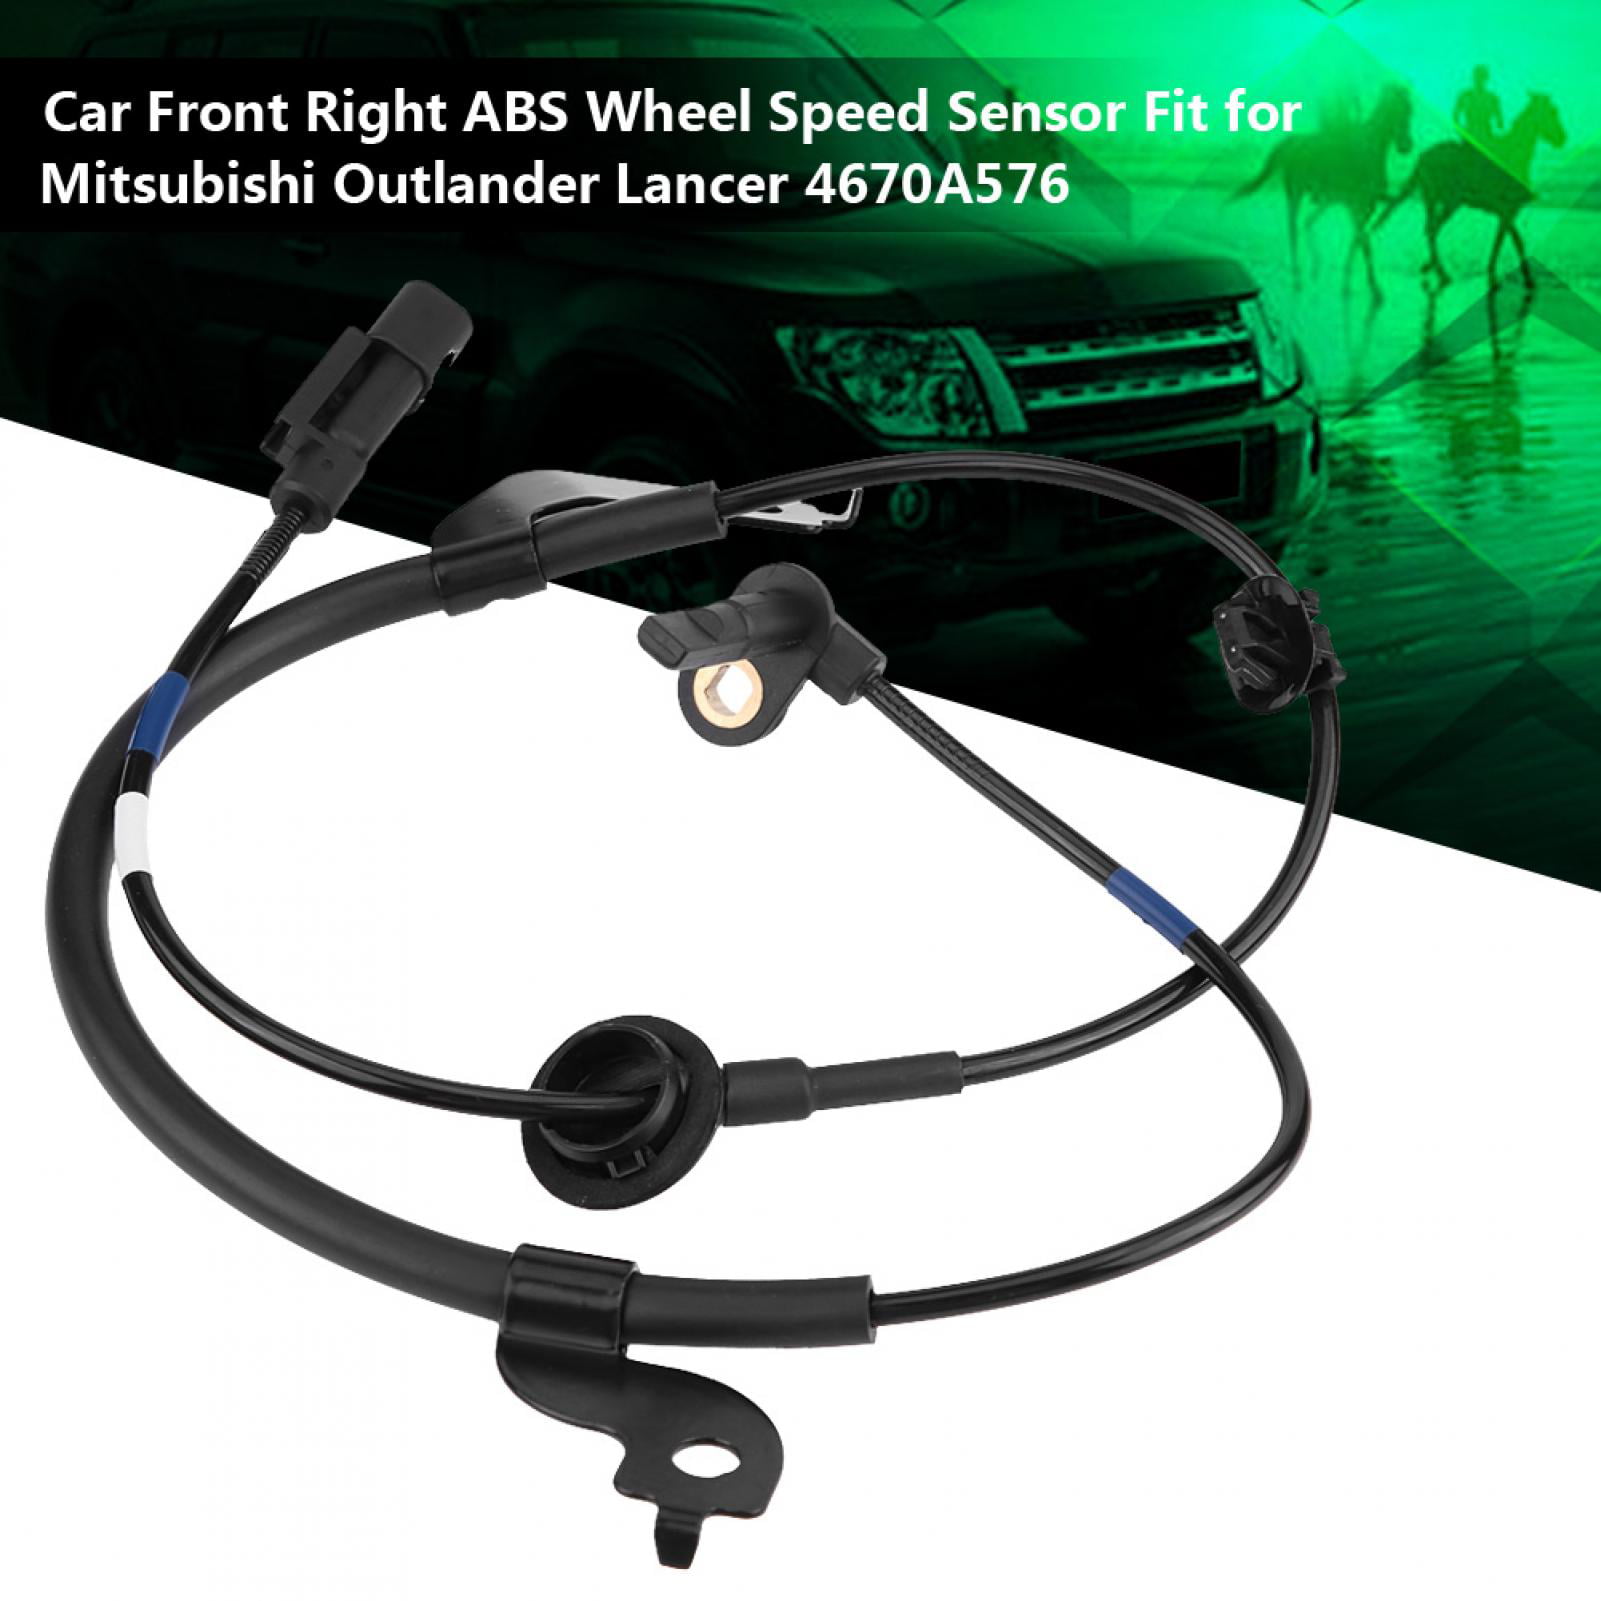 4670A576 ABS Wheel Speed Sensor Front Right For Fit Mitsubishi Outlander Lancer